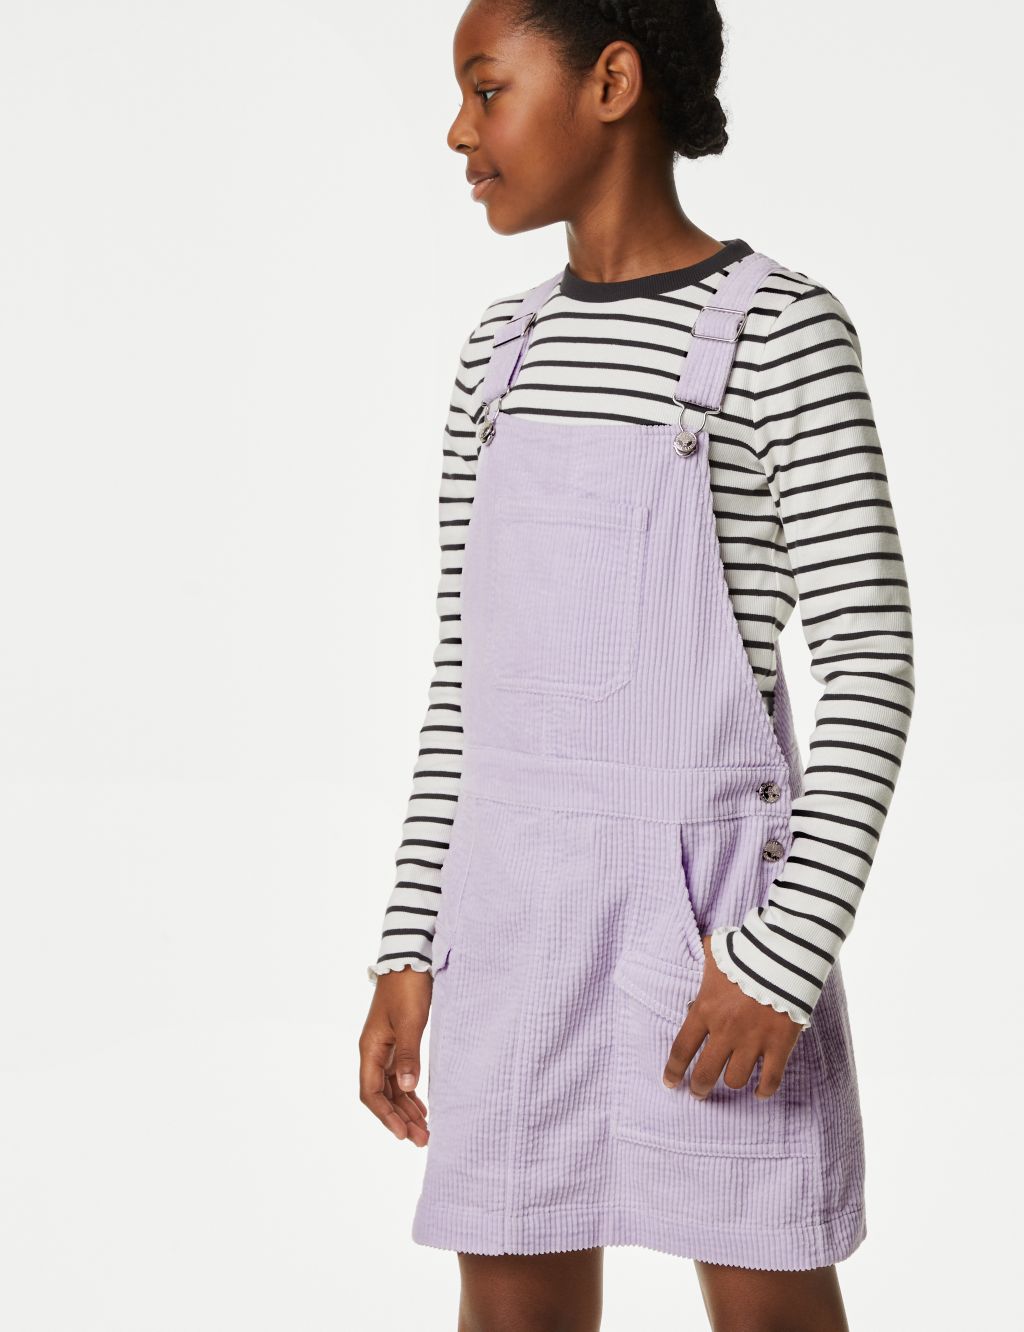 2pc Cotton Rich Striped Pinafore Outfit (6-16 Yrs) image 3